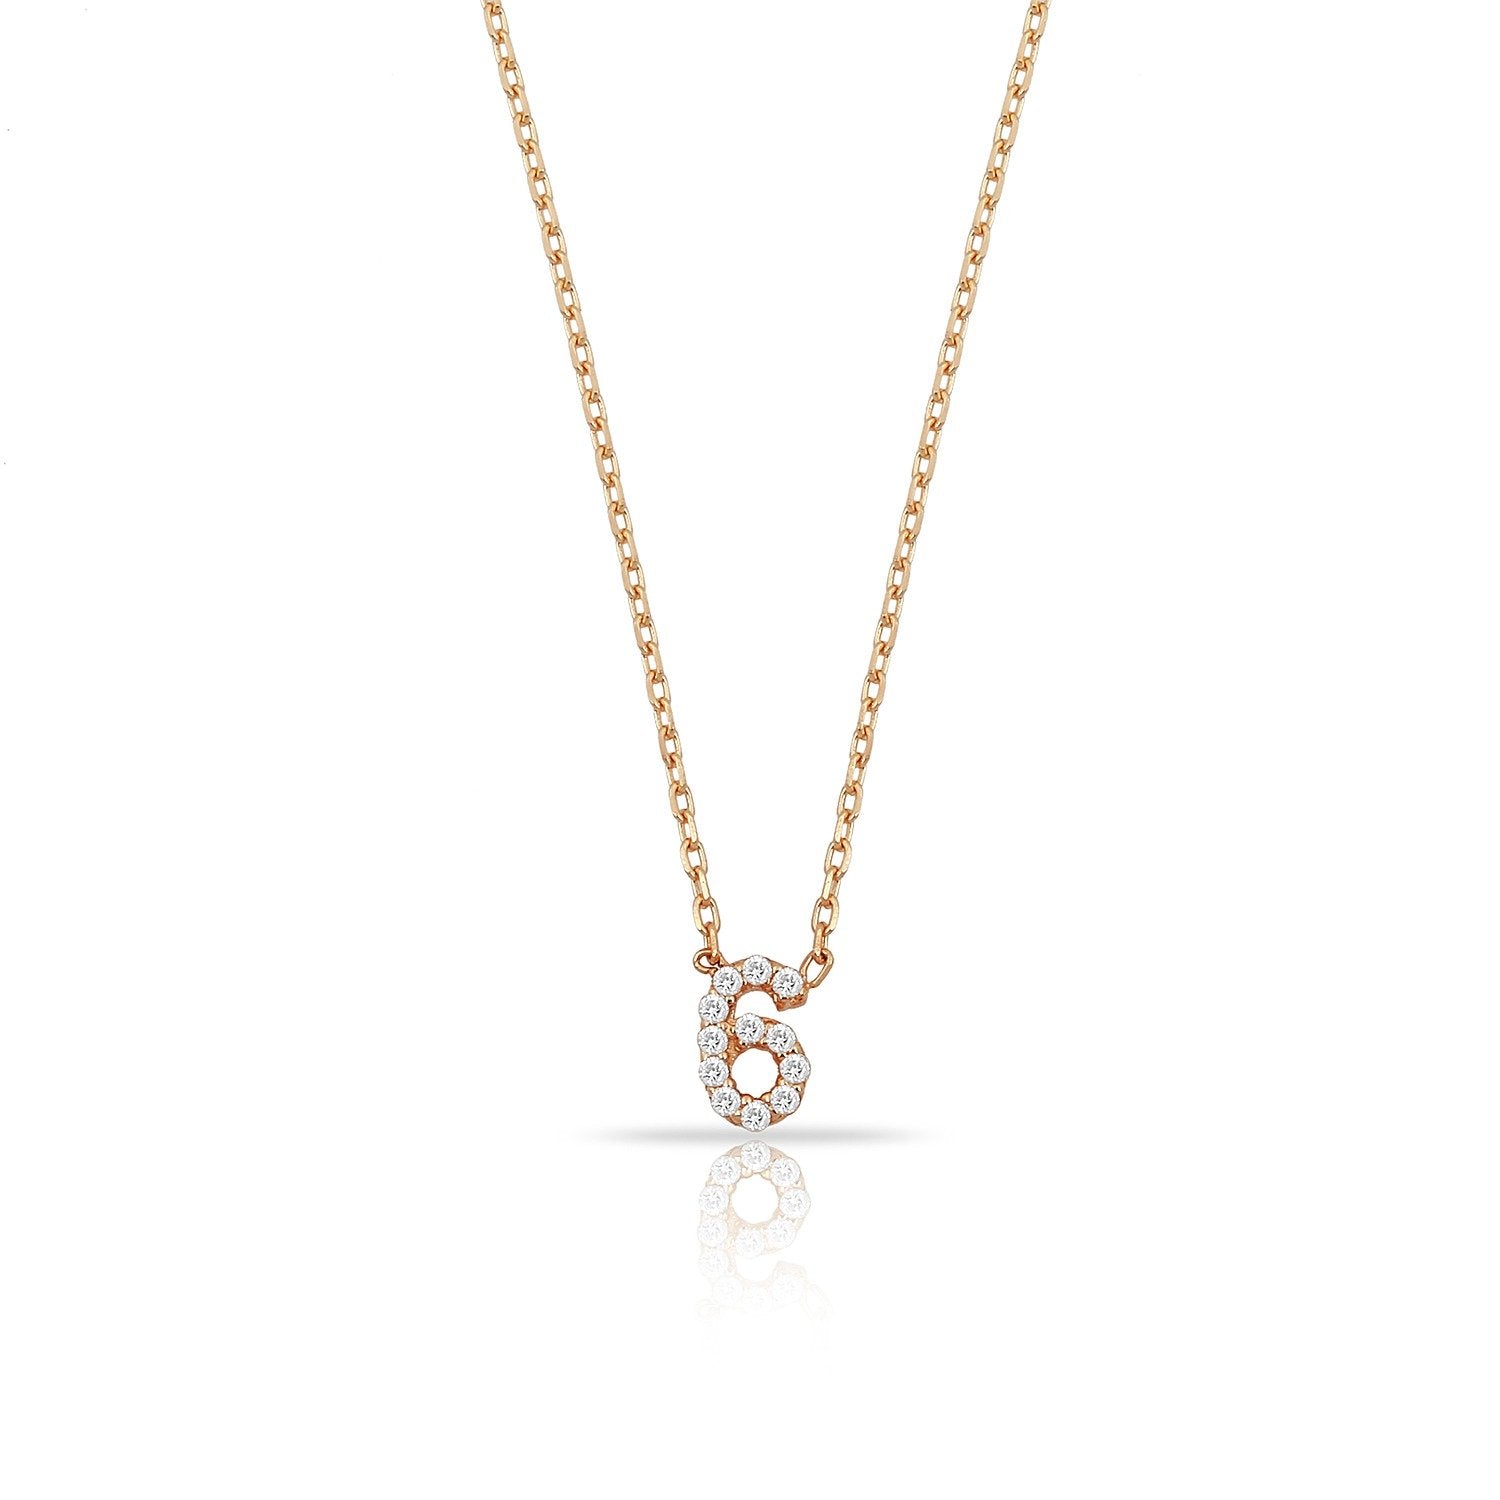 TSK Perry St. Diamond Digit Necklace JEWELRY The Sis Kiss 14k Rose Gold